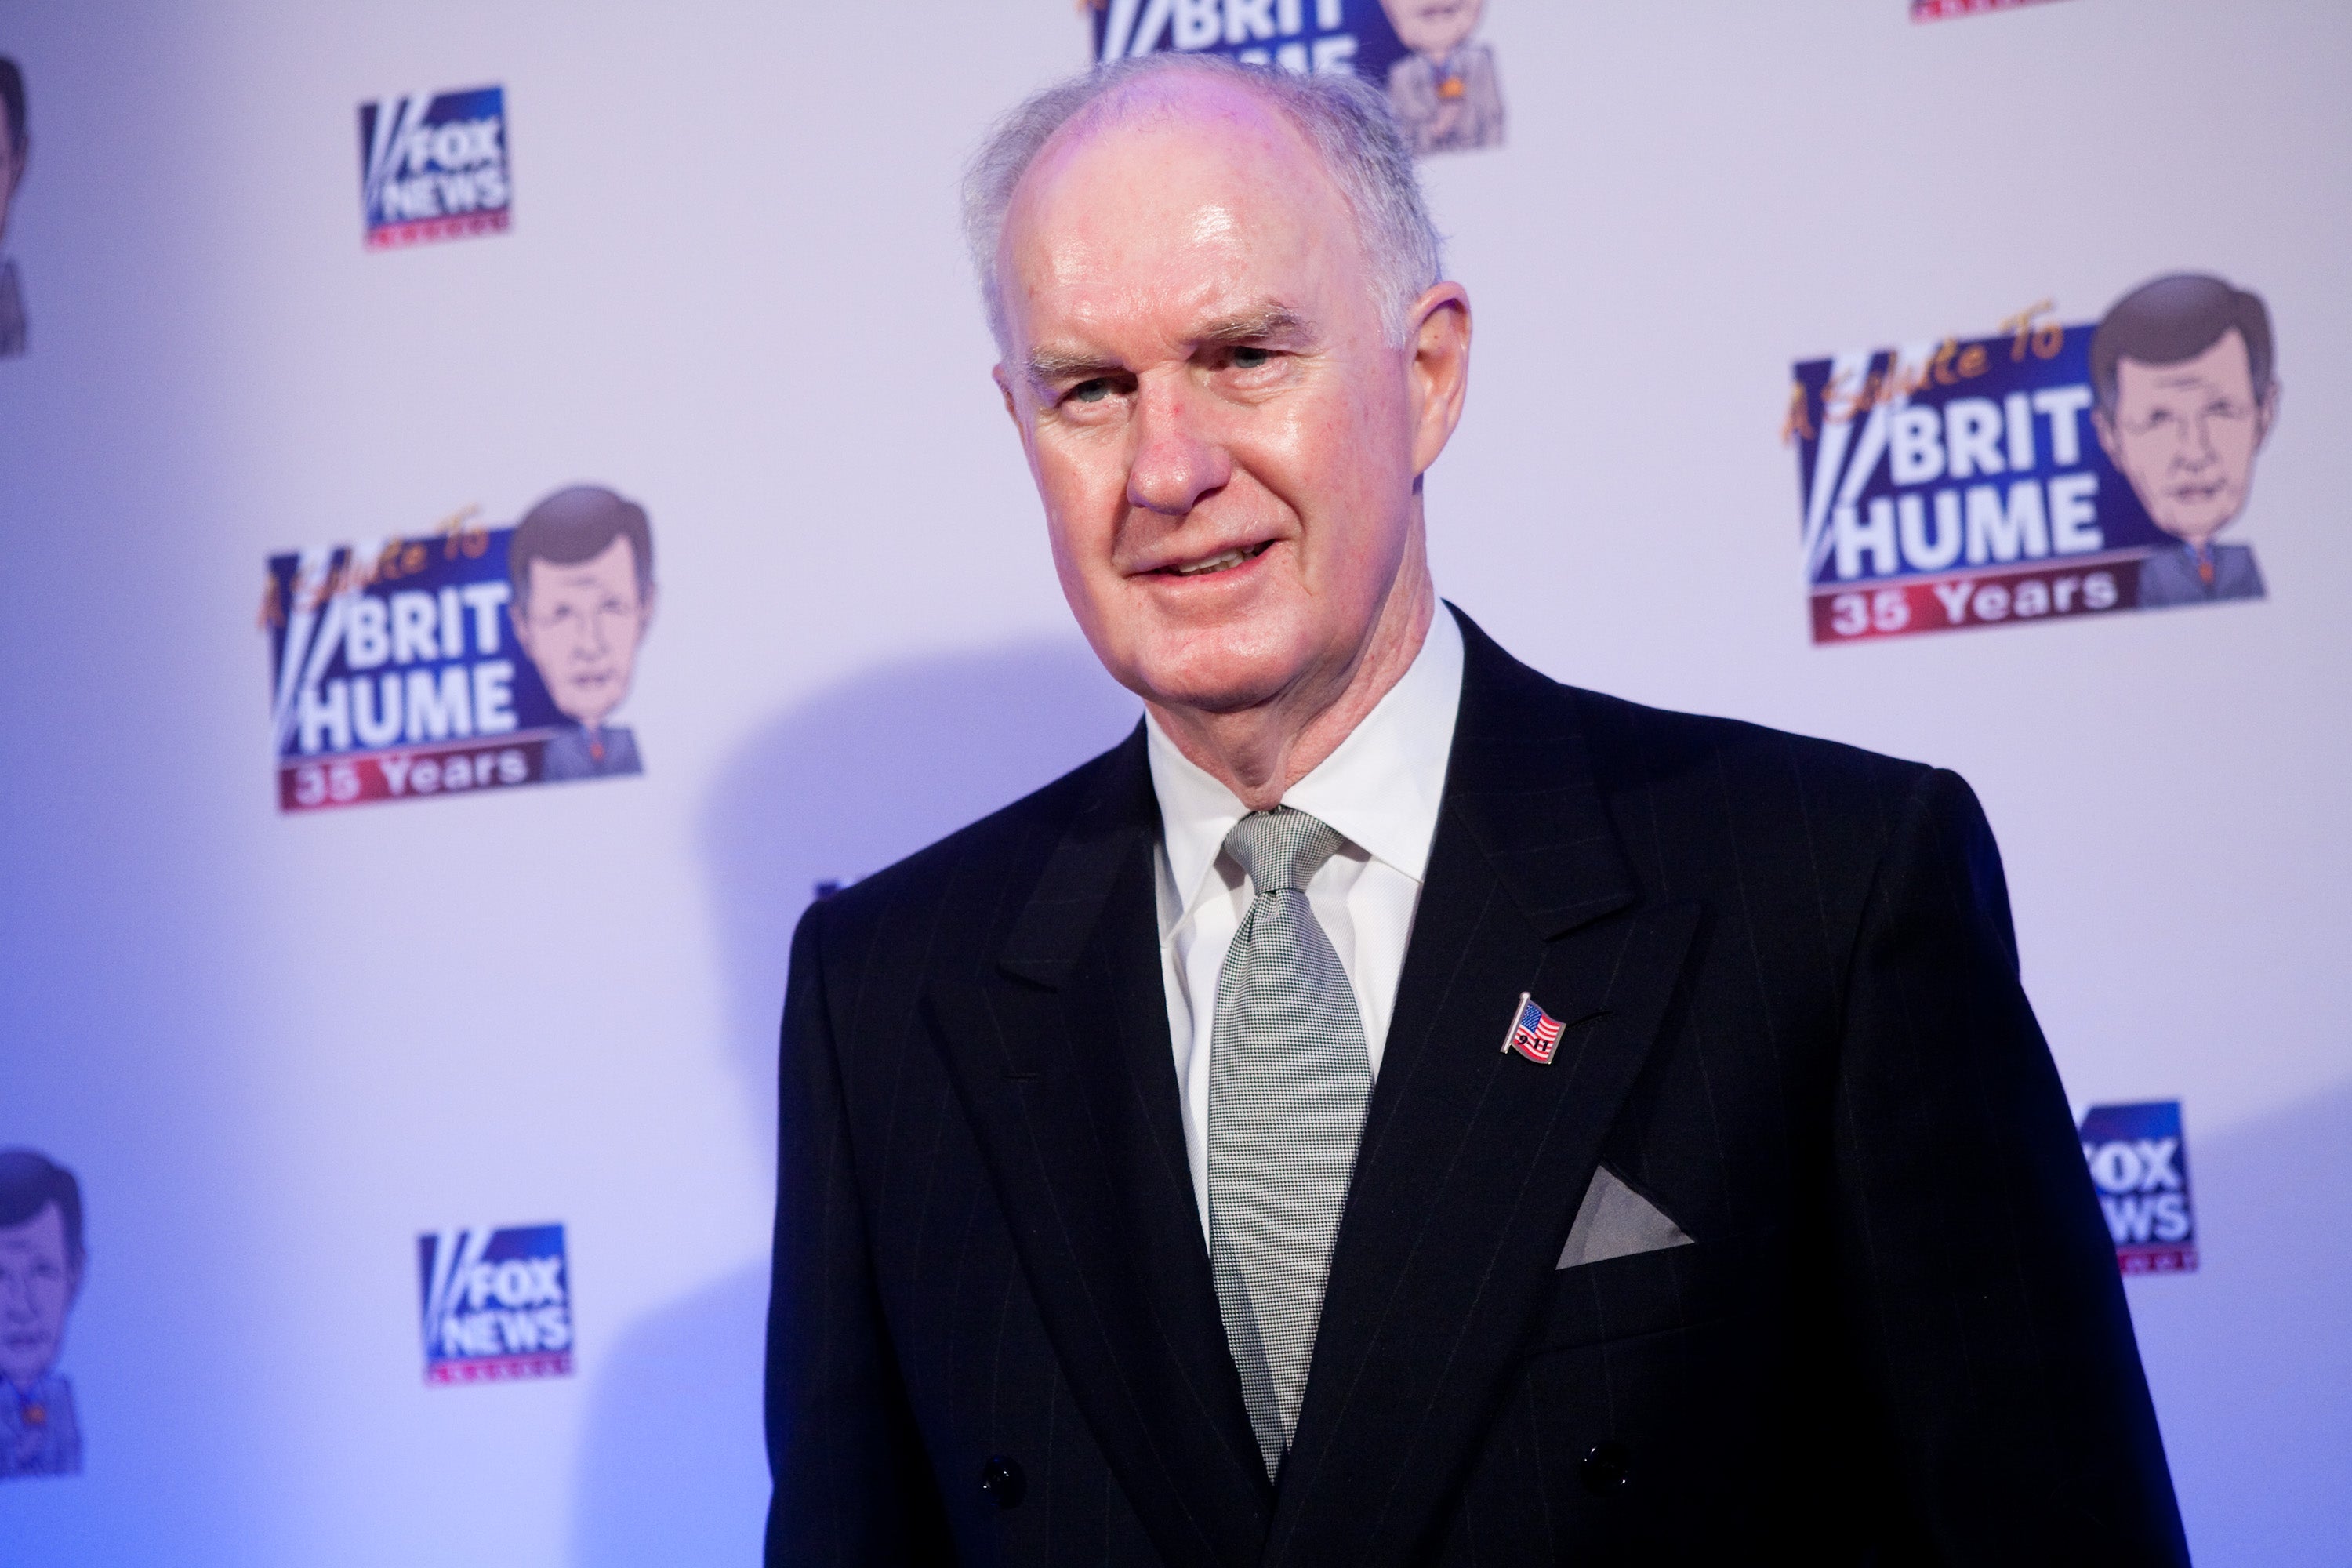 Thomas McInerney in front of Fox News logos at a red-carpet event.